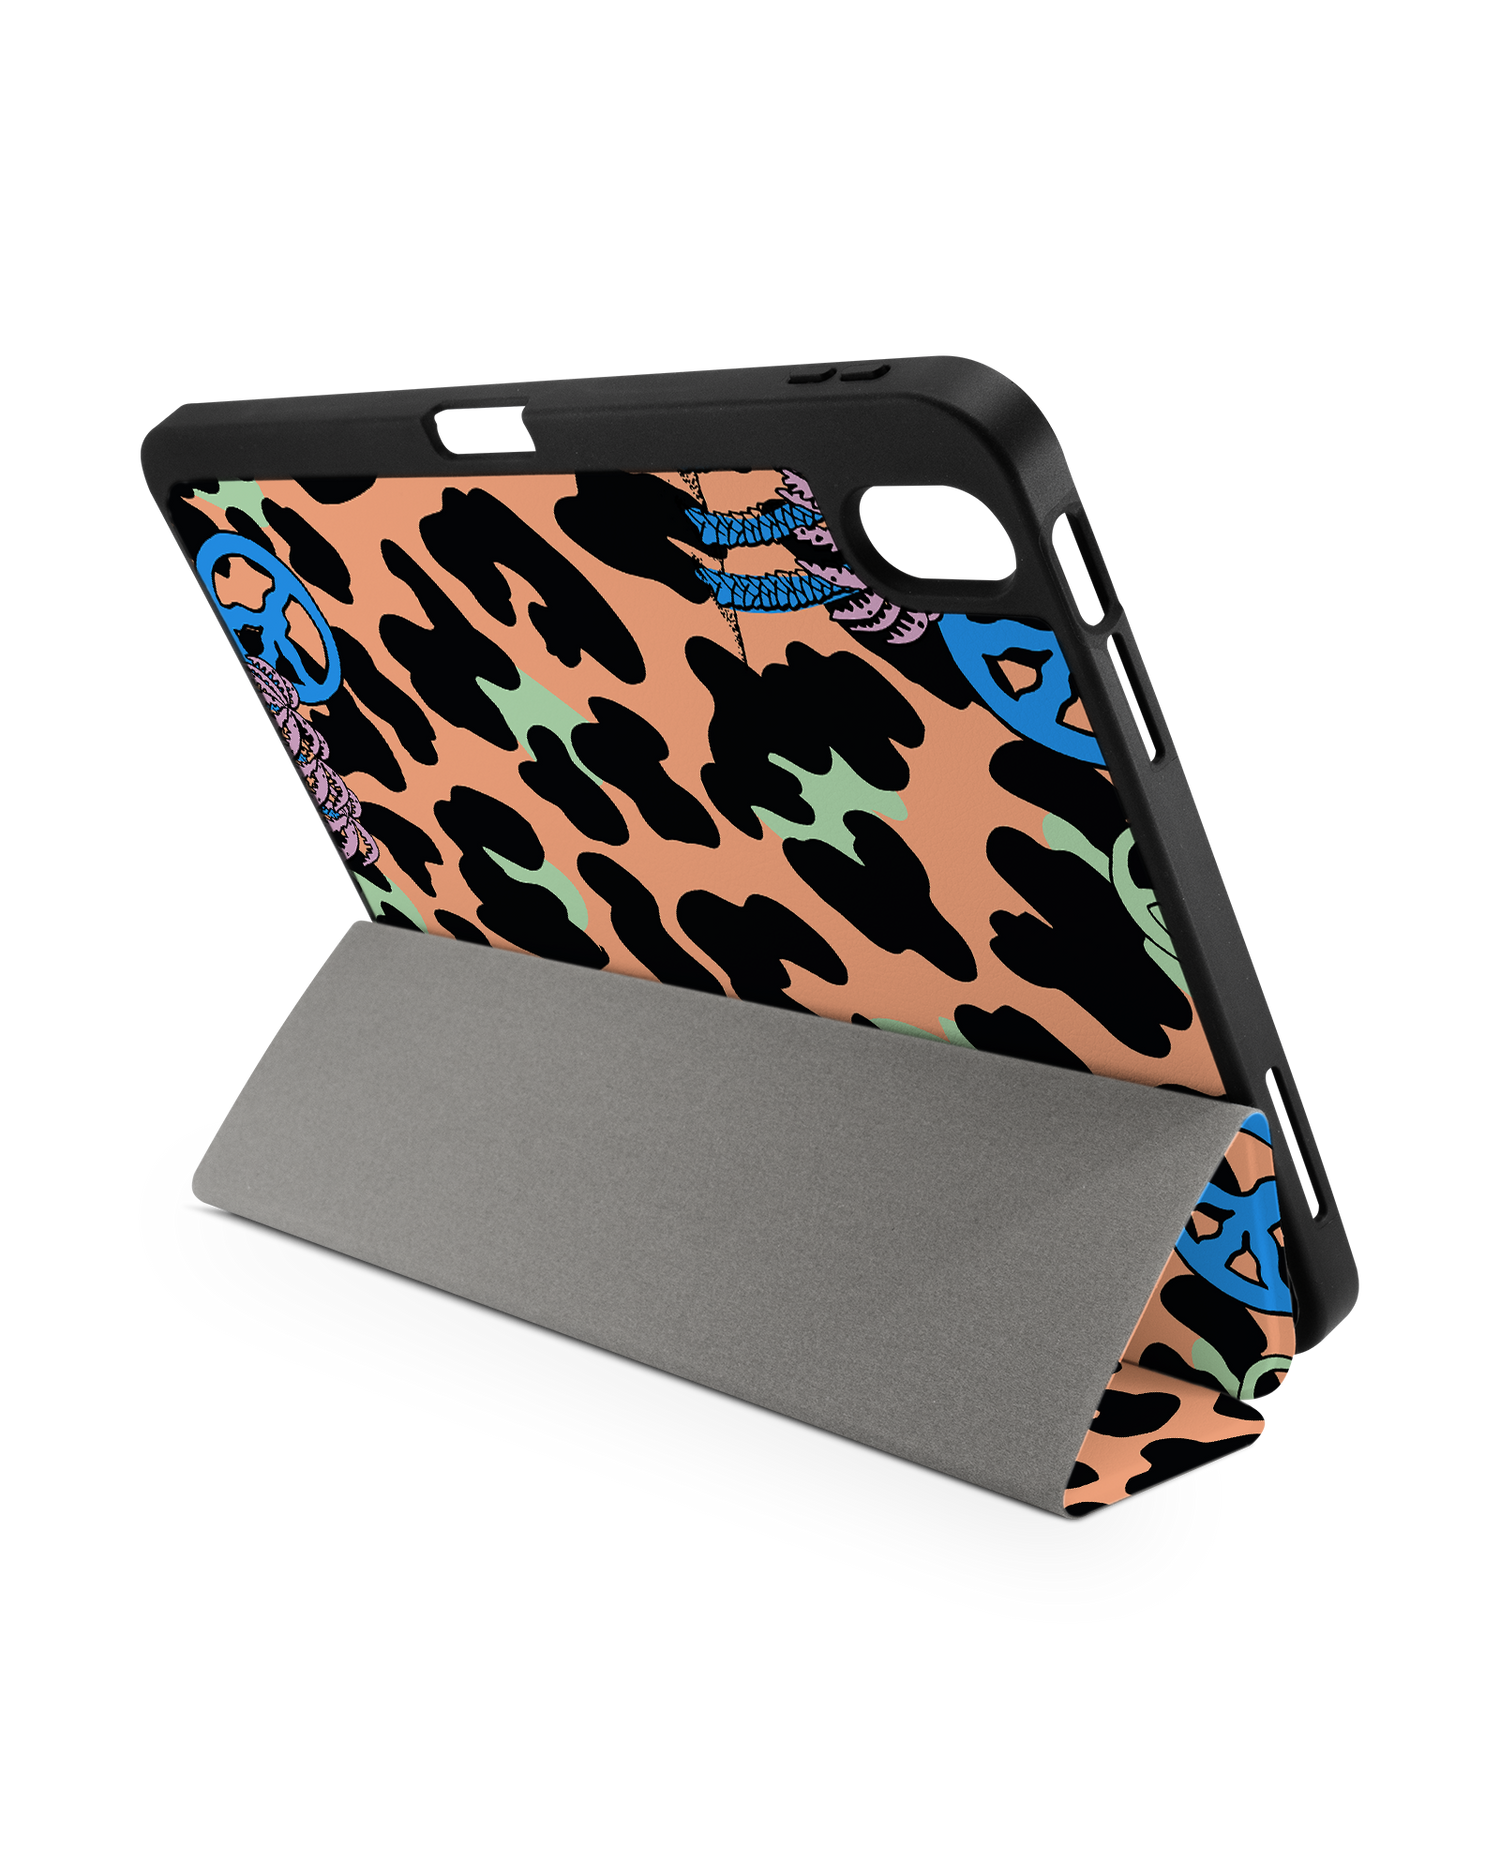 Leopard Peace Palms iPad Case with Pencil Holder for Apple iPad (10th Generation): Set up in landscape format (back view)